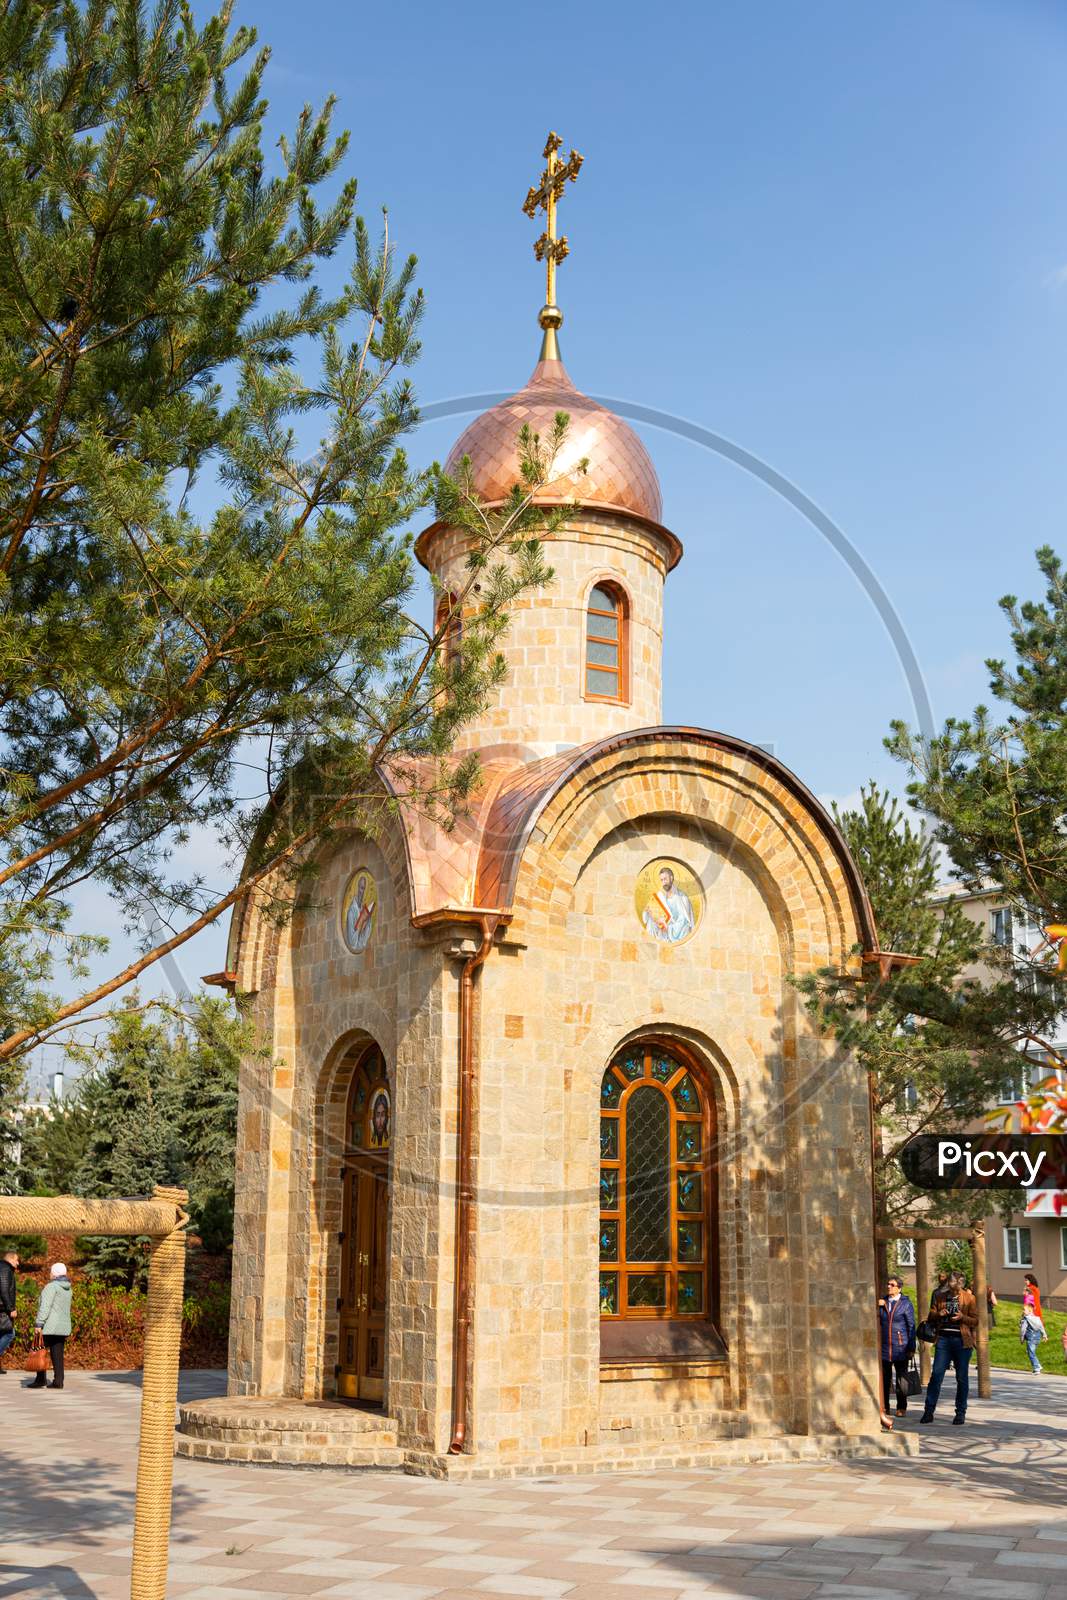 A Small City Chapel Made Of Stone With Golden Baths And Icons Located In The City Park. The Concept Of The Orthodox Church.